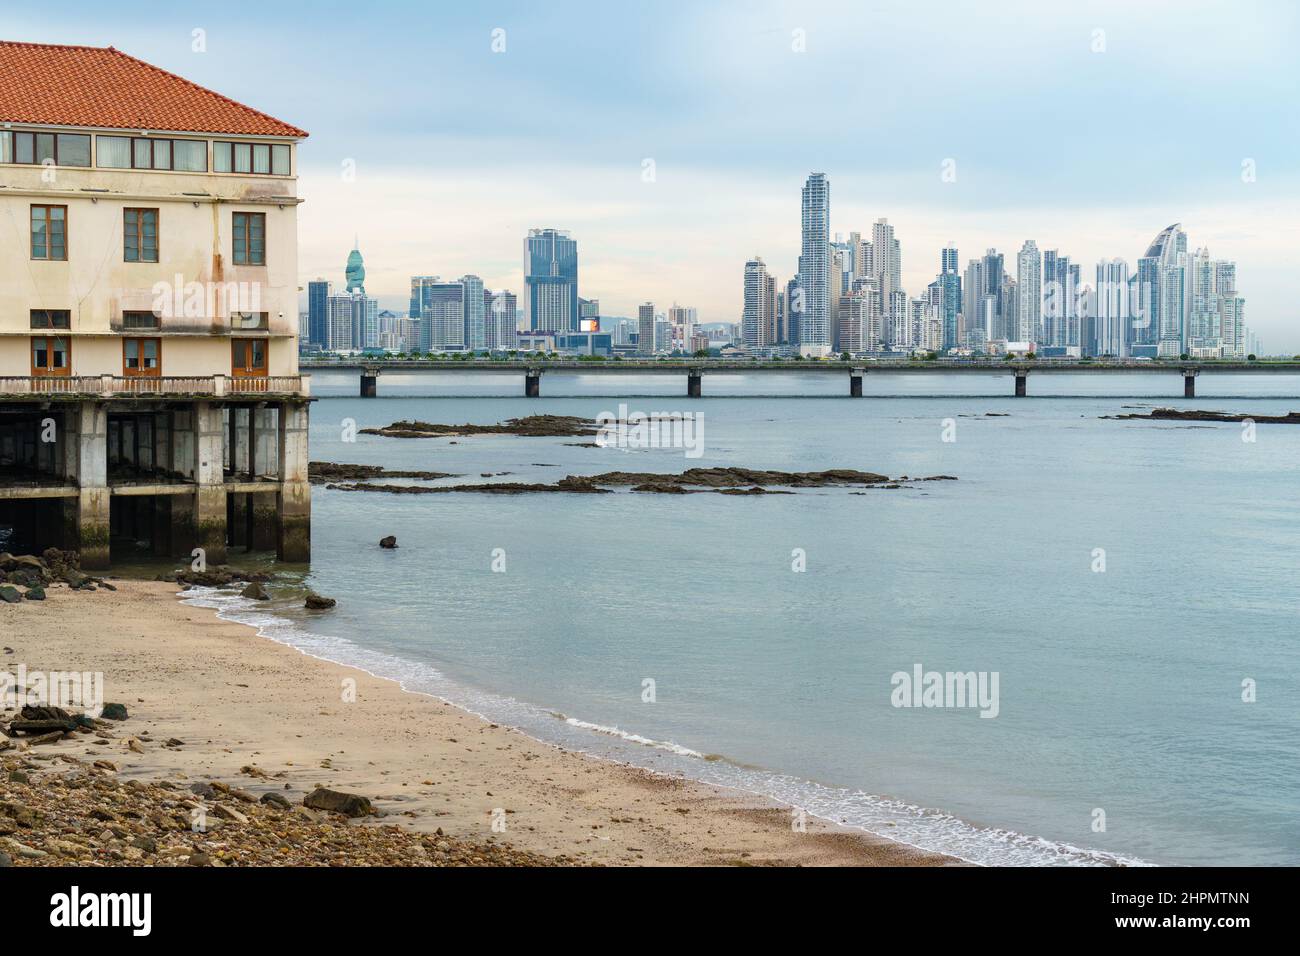 Modern skyline viewed from the beach in Casco Viejo Panama City, with a bridge separating new from old. Stock Photo